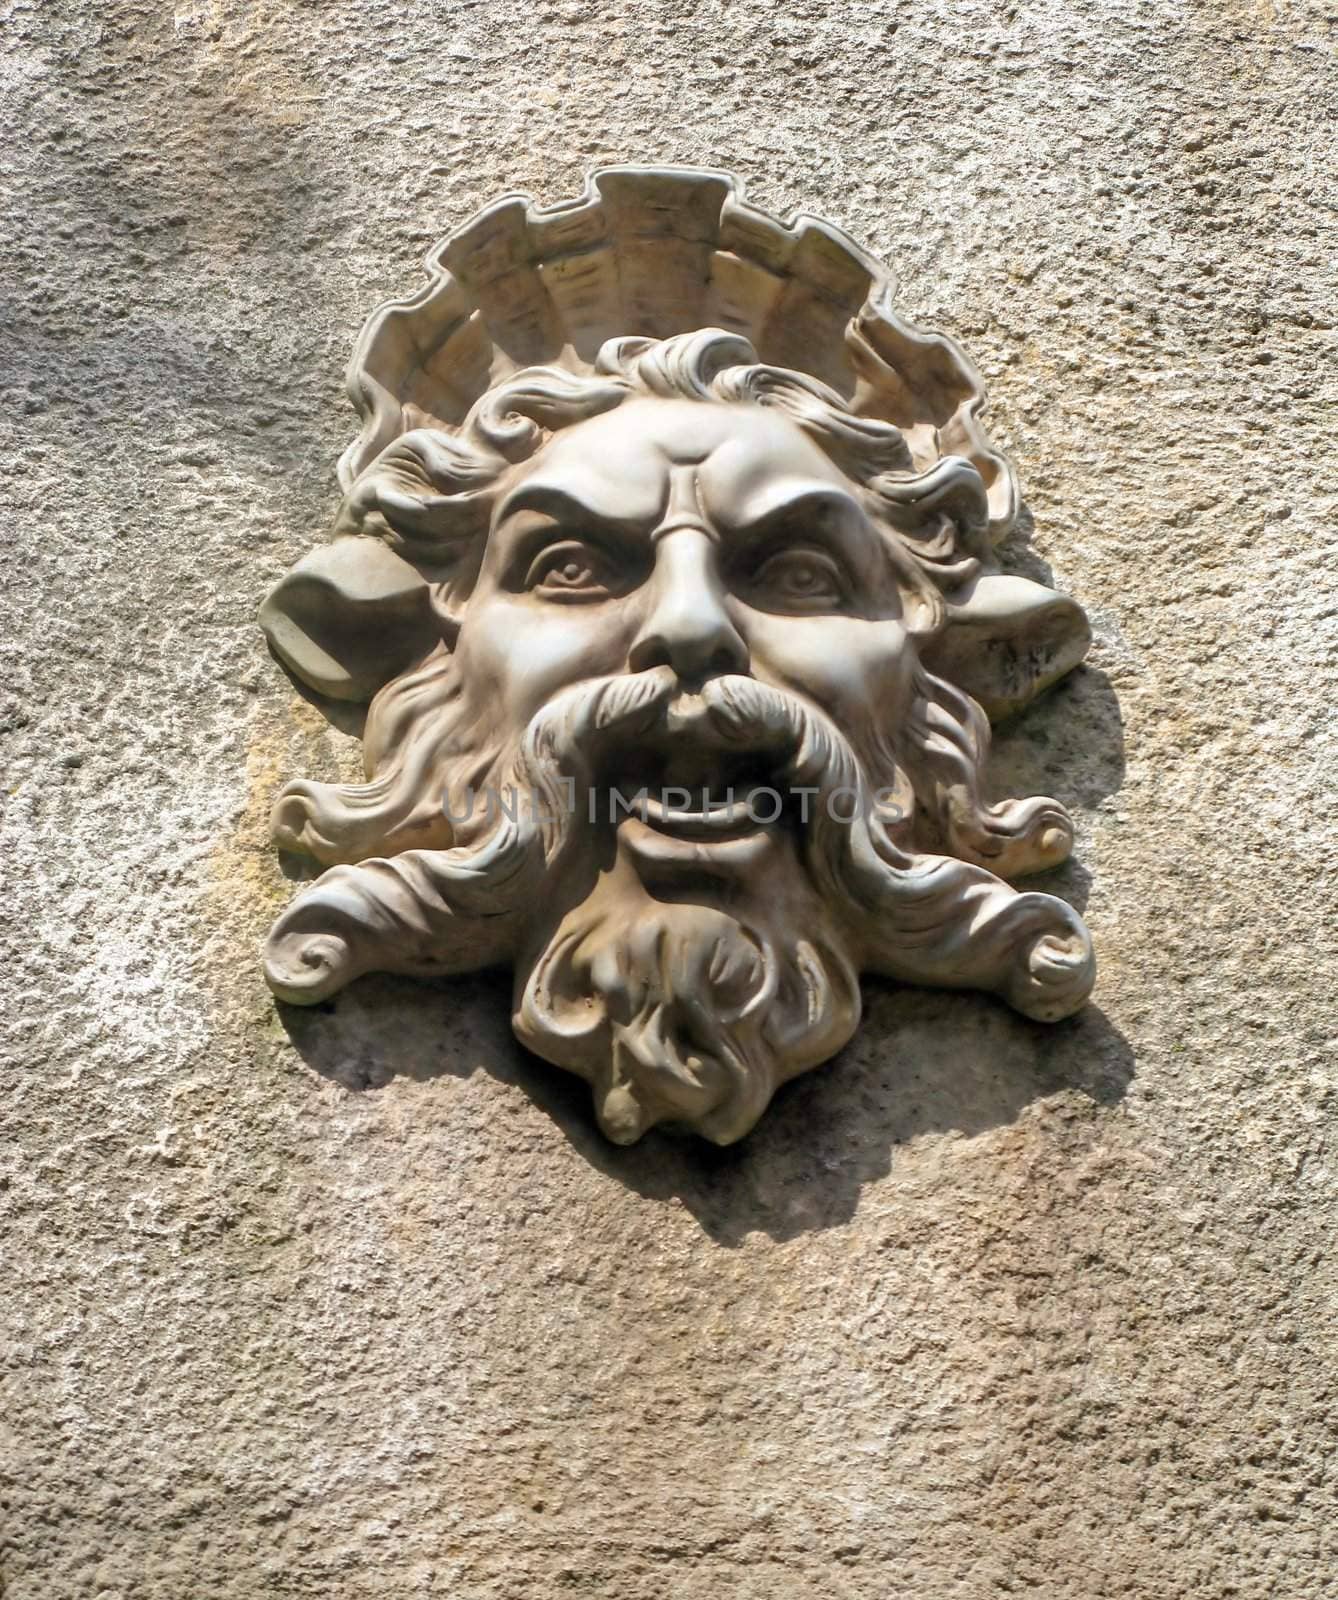 A wall with a stone face on it.